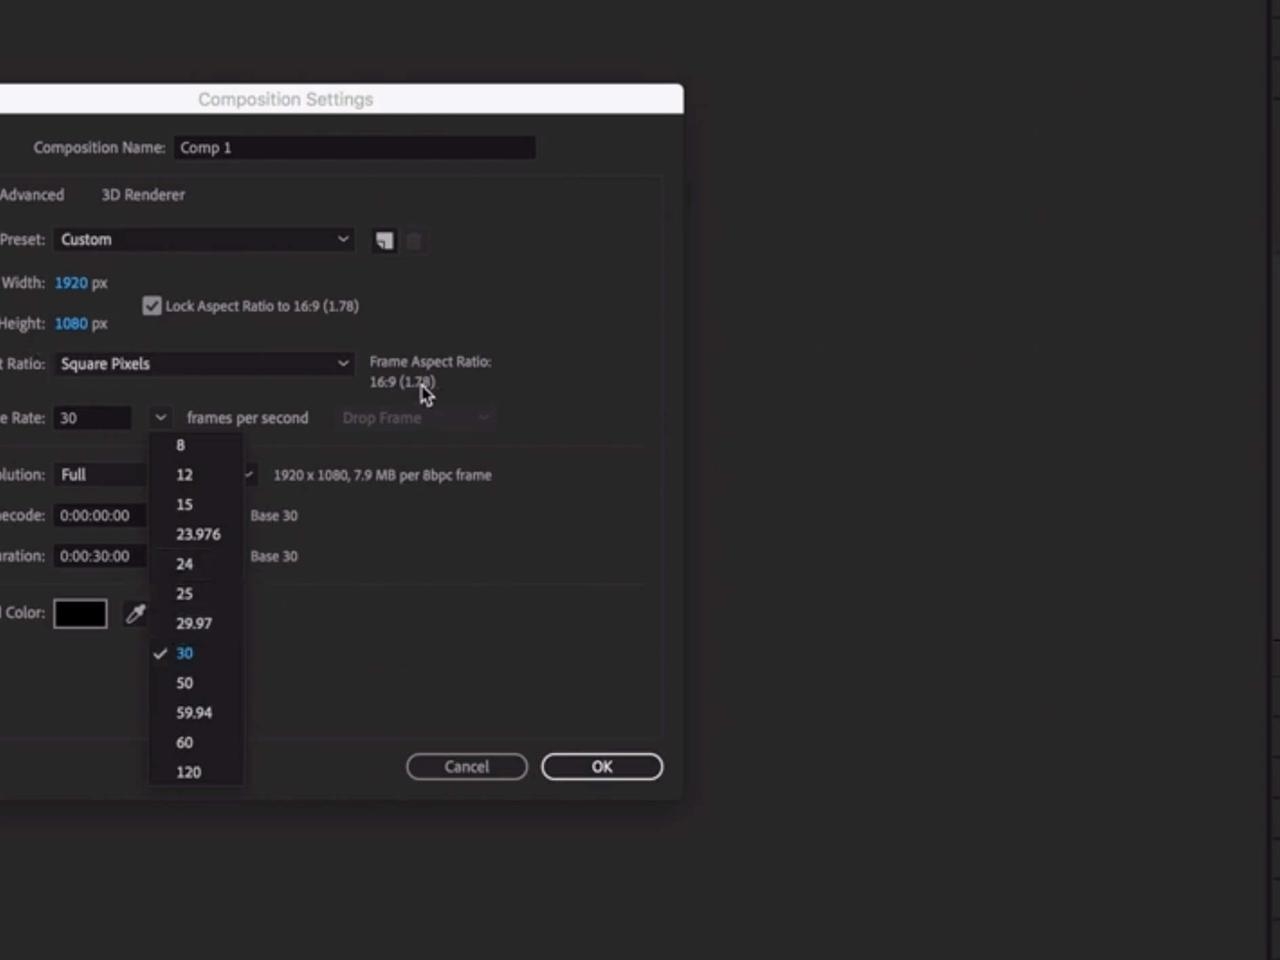 Tutorial: Composition Settings in After Effects, by Jordan Lambrecht